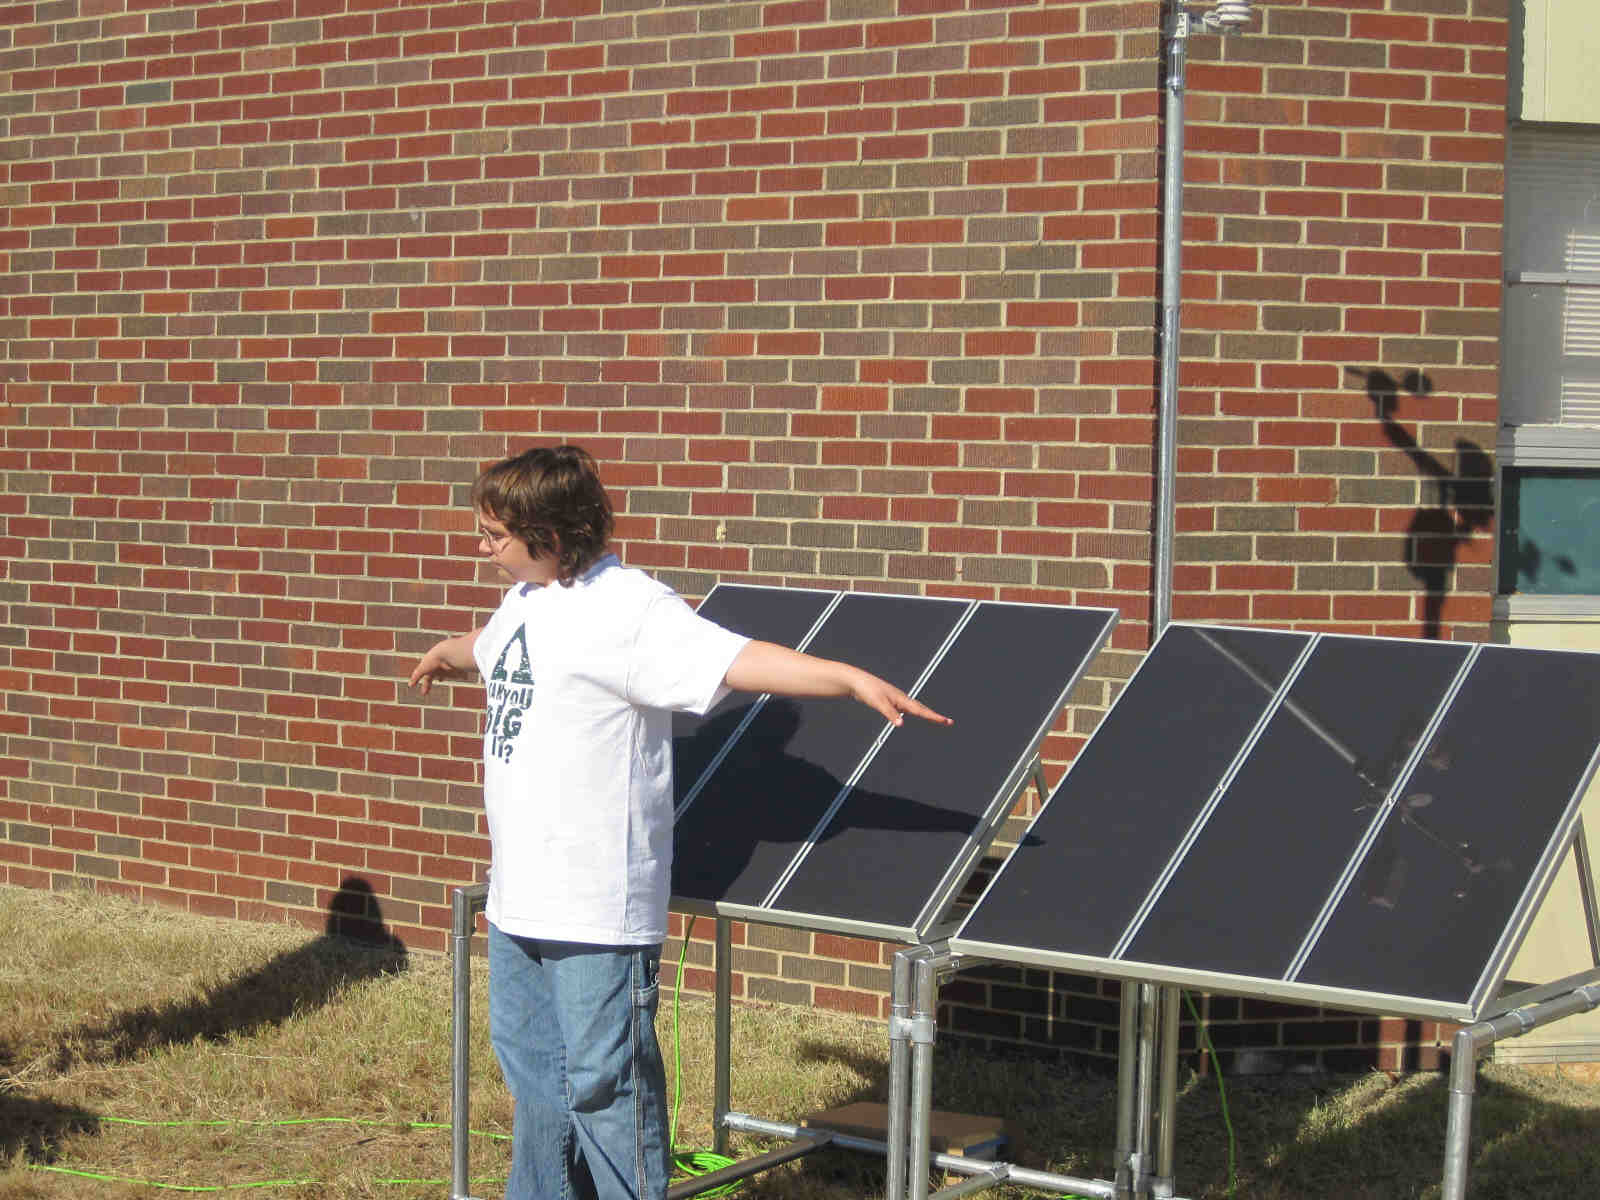 Let the experiments begin.  A student demonstrates the variation of energy production of the solar panels is directly related to the amount of sunlight that strikes them.